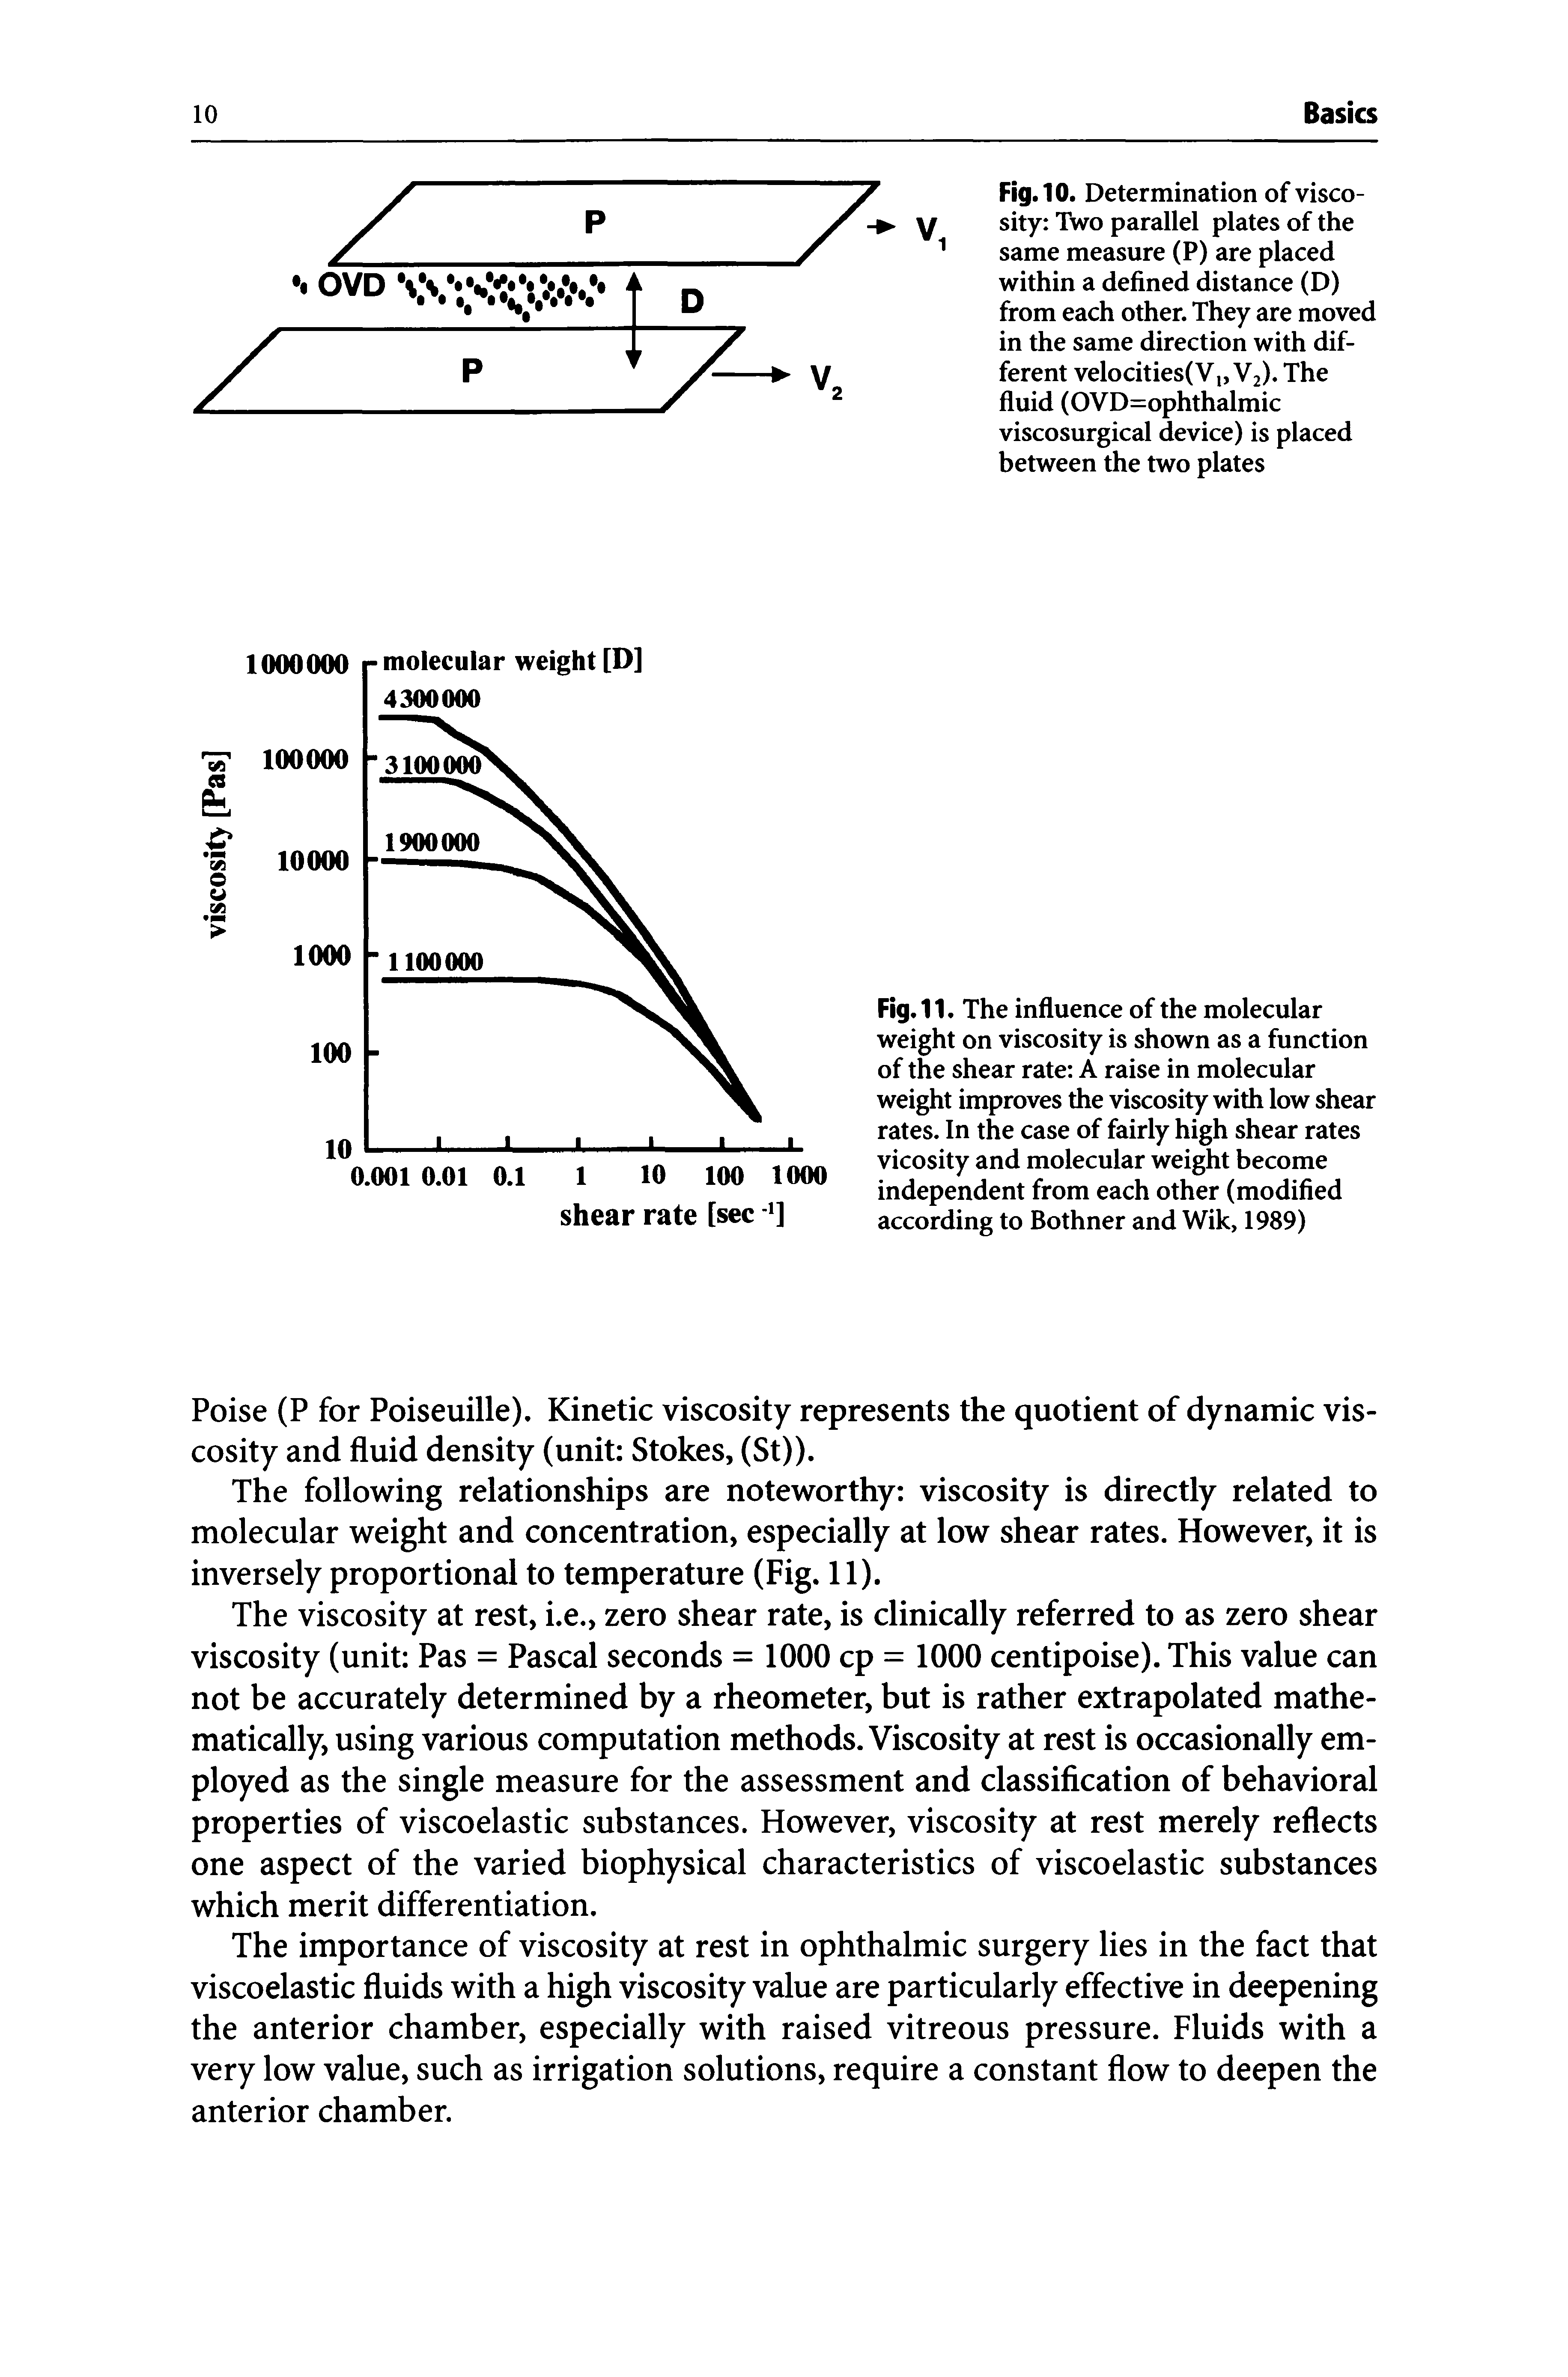 Fig.11. The influence of the molecular weight on viscosity is shown as a function of the shear rate A raise in molecular weight improves the viscosity with low shear rates. In the case of fairly high shear rates vicosity and molecular weight become independent from each other (modified according to Bothner and Wik, 1989)...